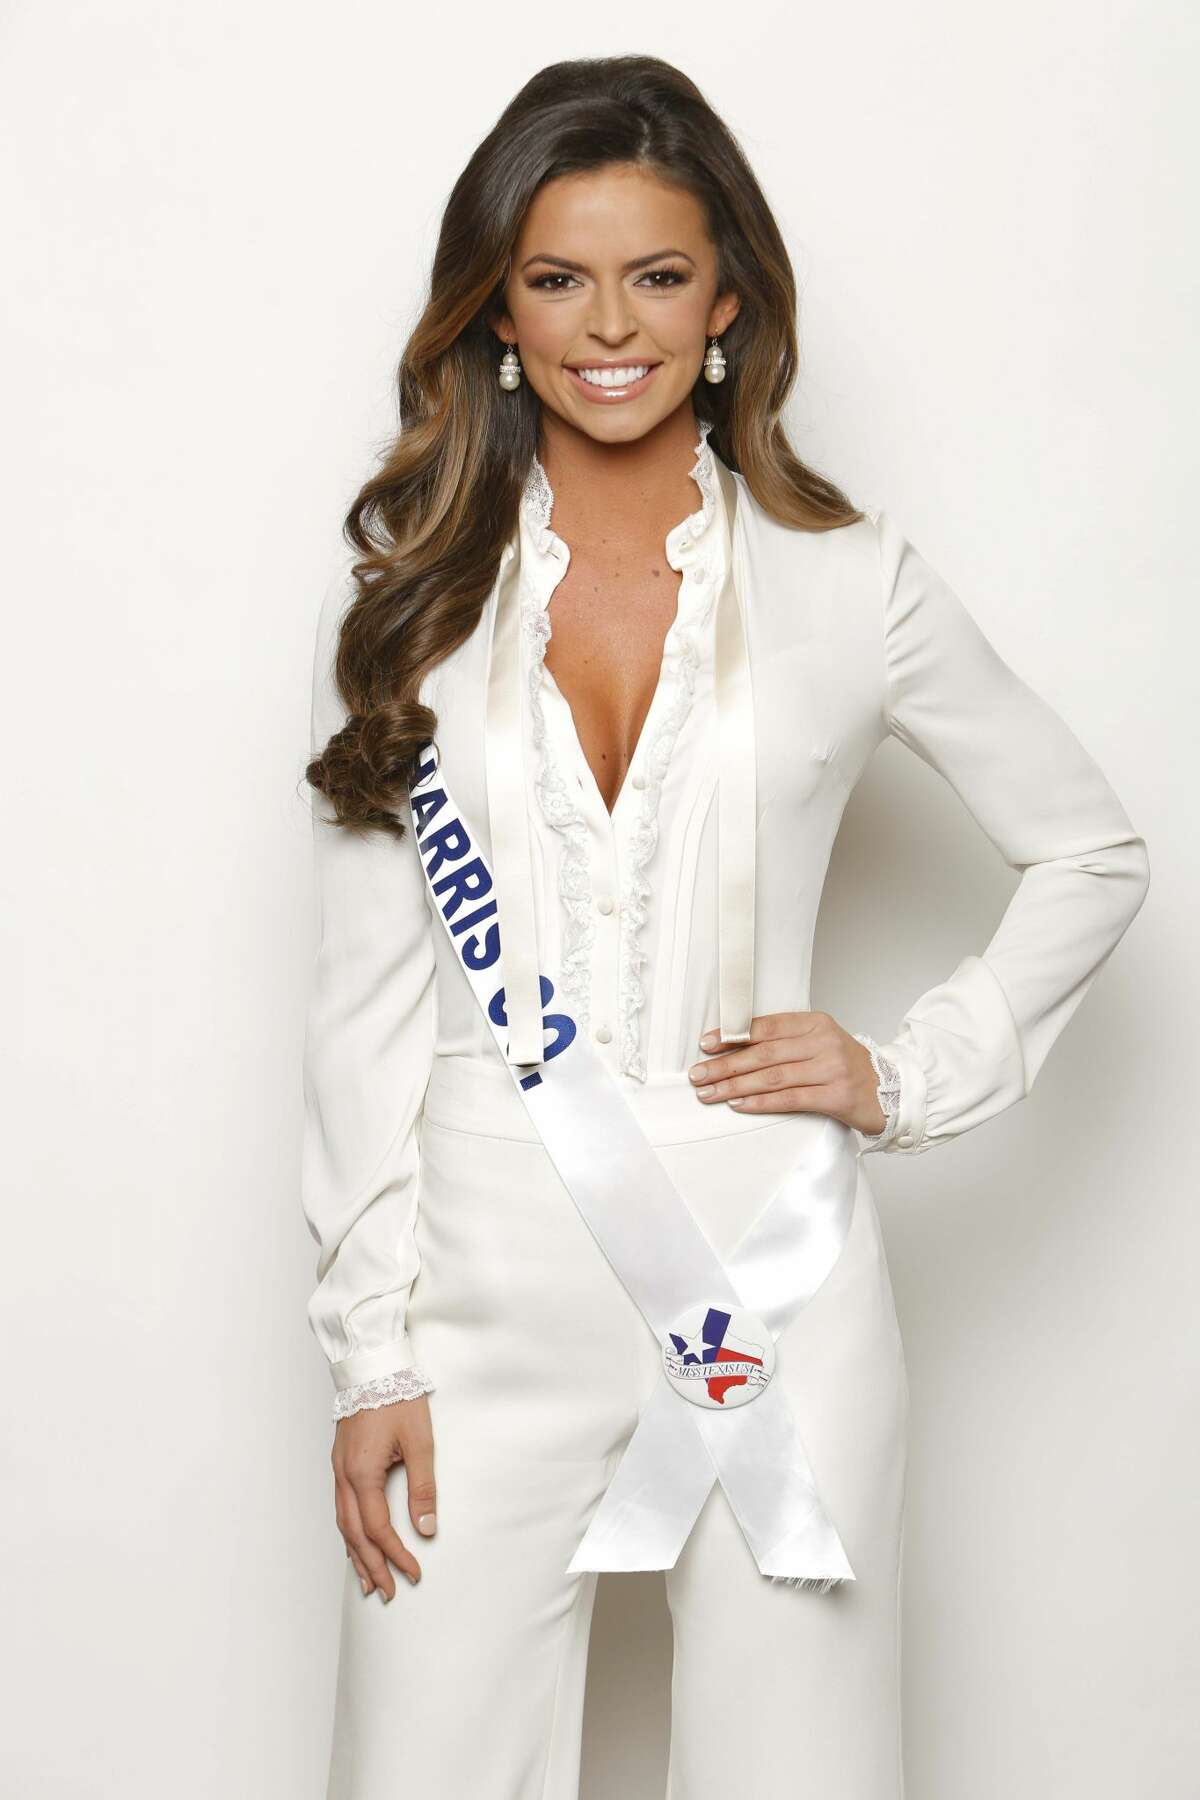 Miss Texas, Houston real estate mogul Logan Lester, throws out first